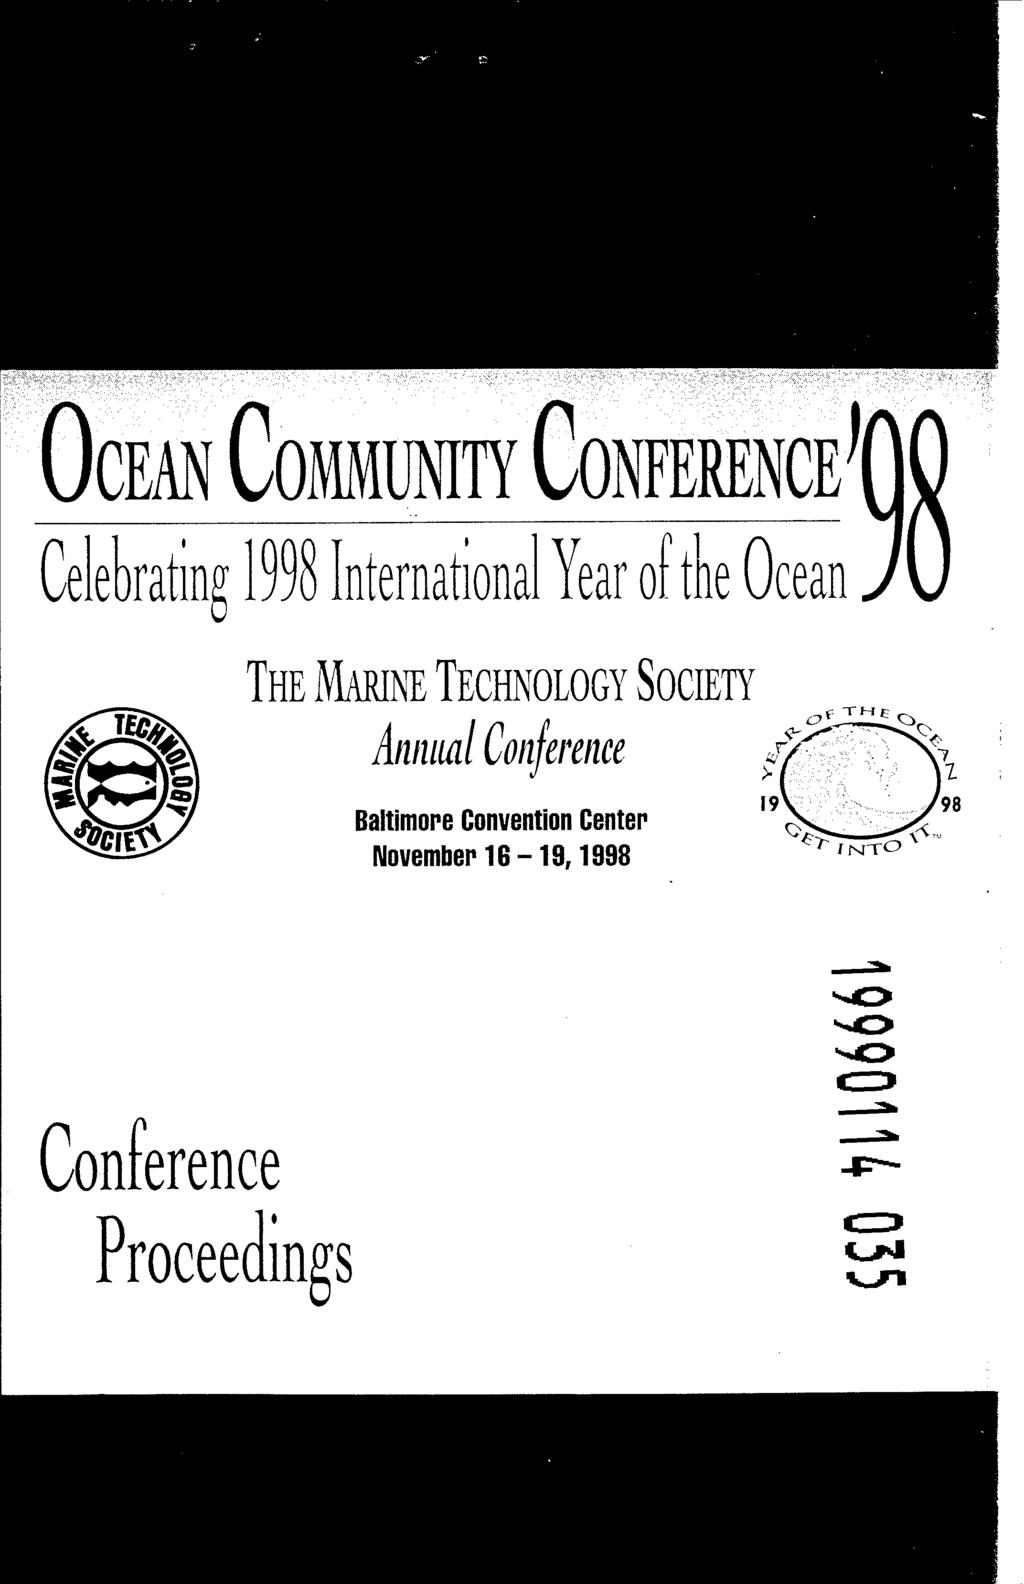 OCEAN COMMUNITY CONFERENCE* Celebrating 1998 International Year of the Ocean THE MARINE TECHNOLOGY